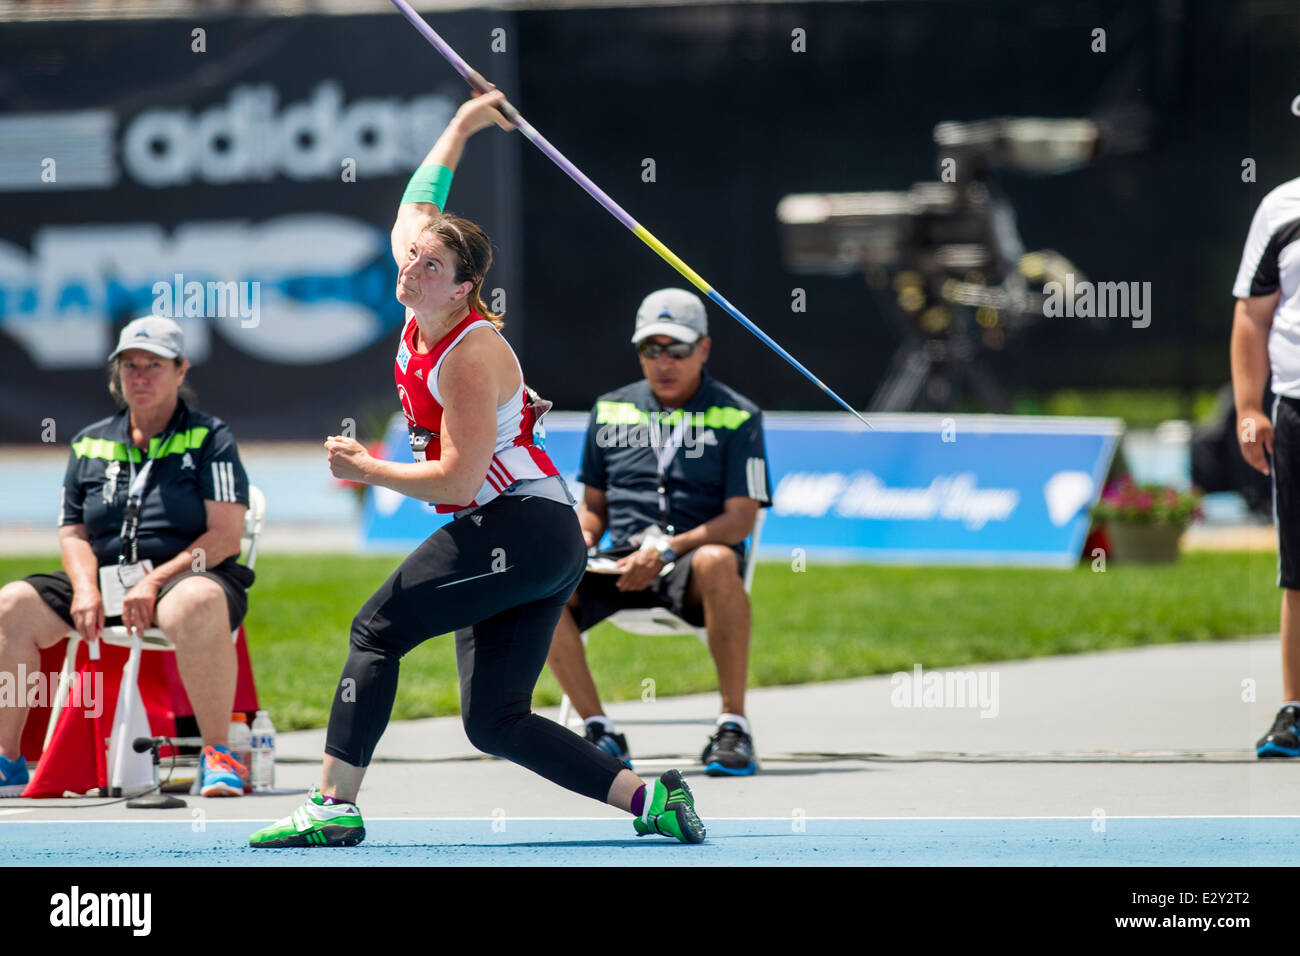 Linda Stahl (GER) competing in the javelin at the 2014 Adidas Track and Field Grand Prix. Stock Photo